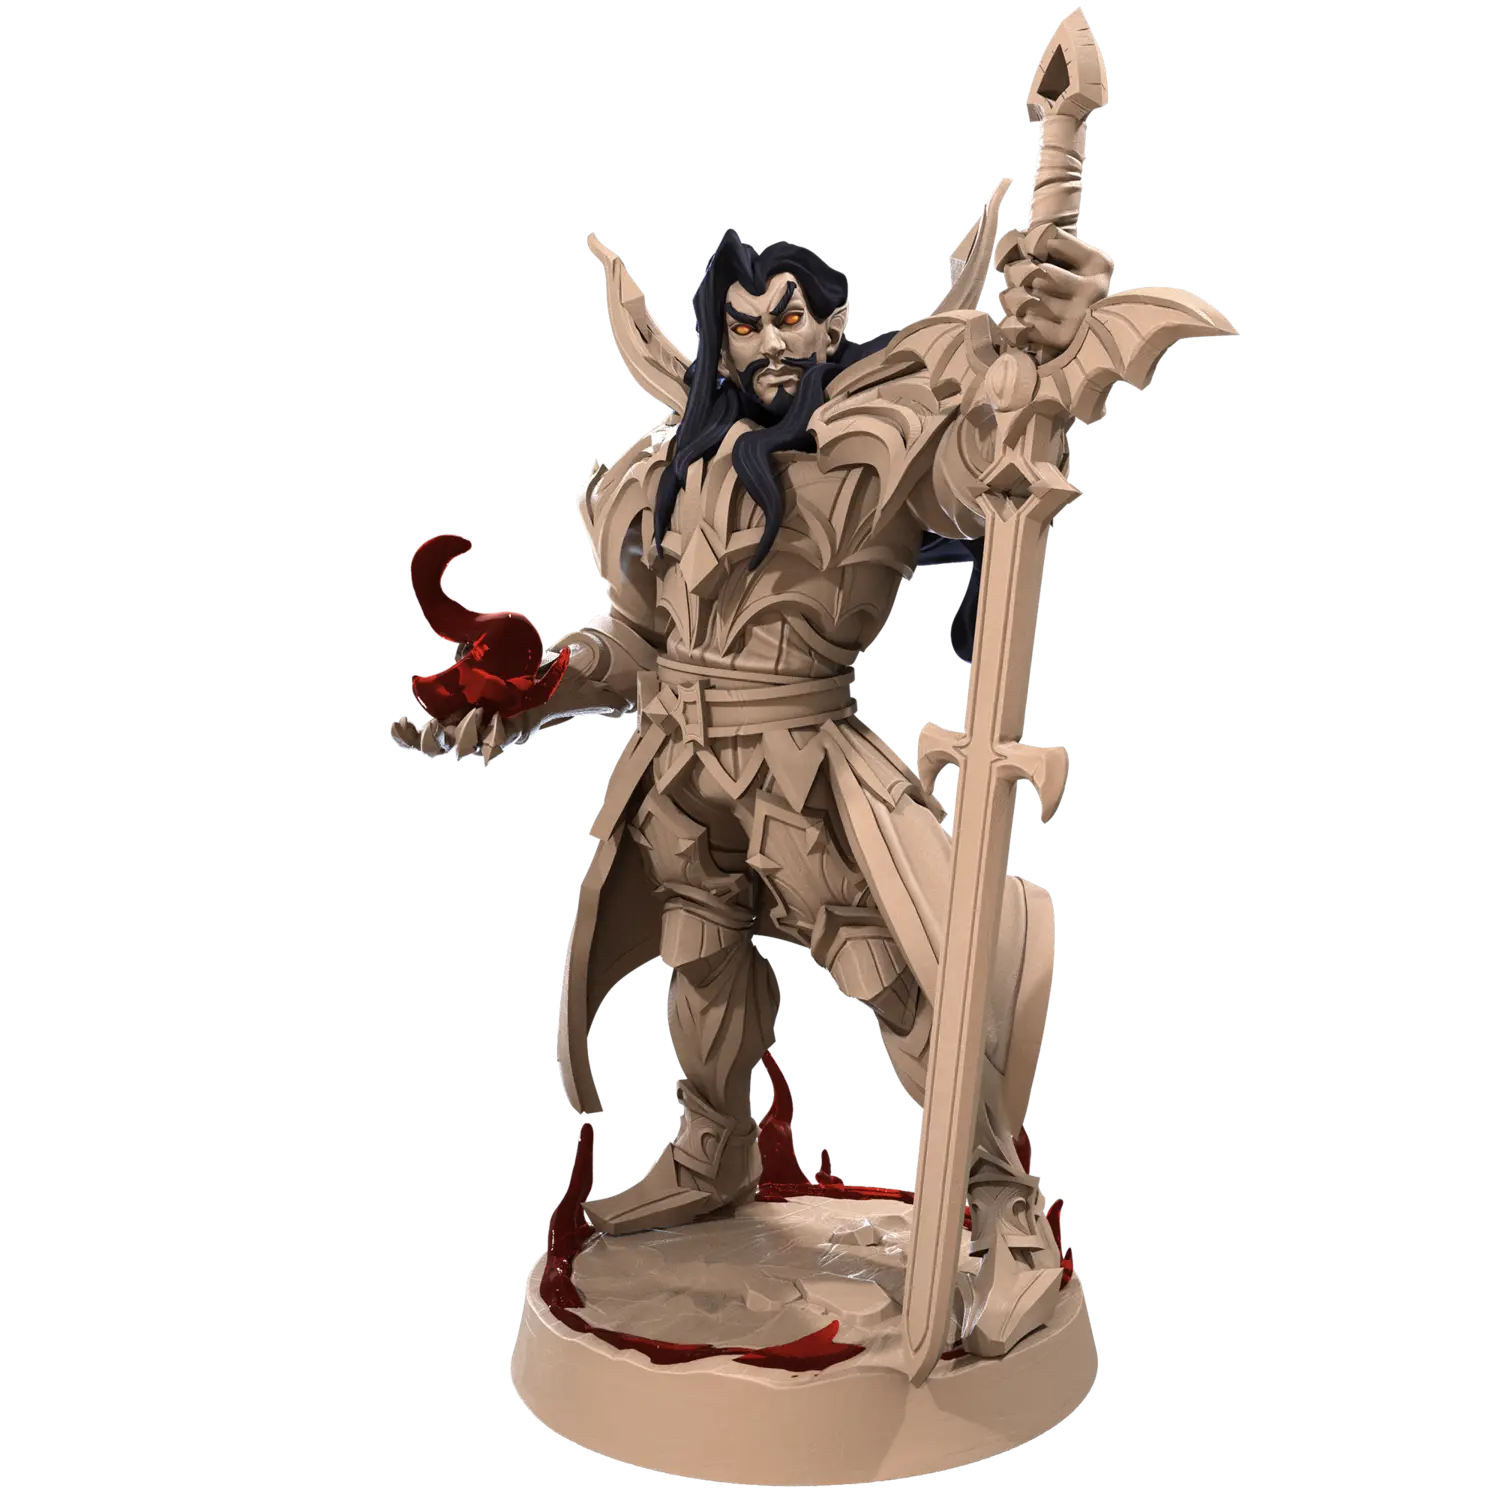 DnD Elf - Fighter - Miniature - Monsters - Paladin - Vampires Lucius Nightshade  Elf - Fighter - Miniature - Monsters - Paladin - Vampires sold by DoubleHitShop